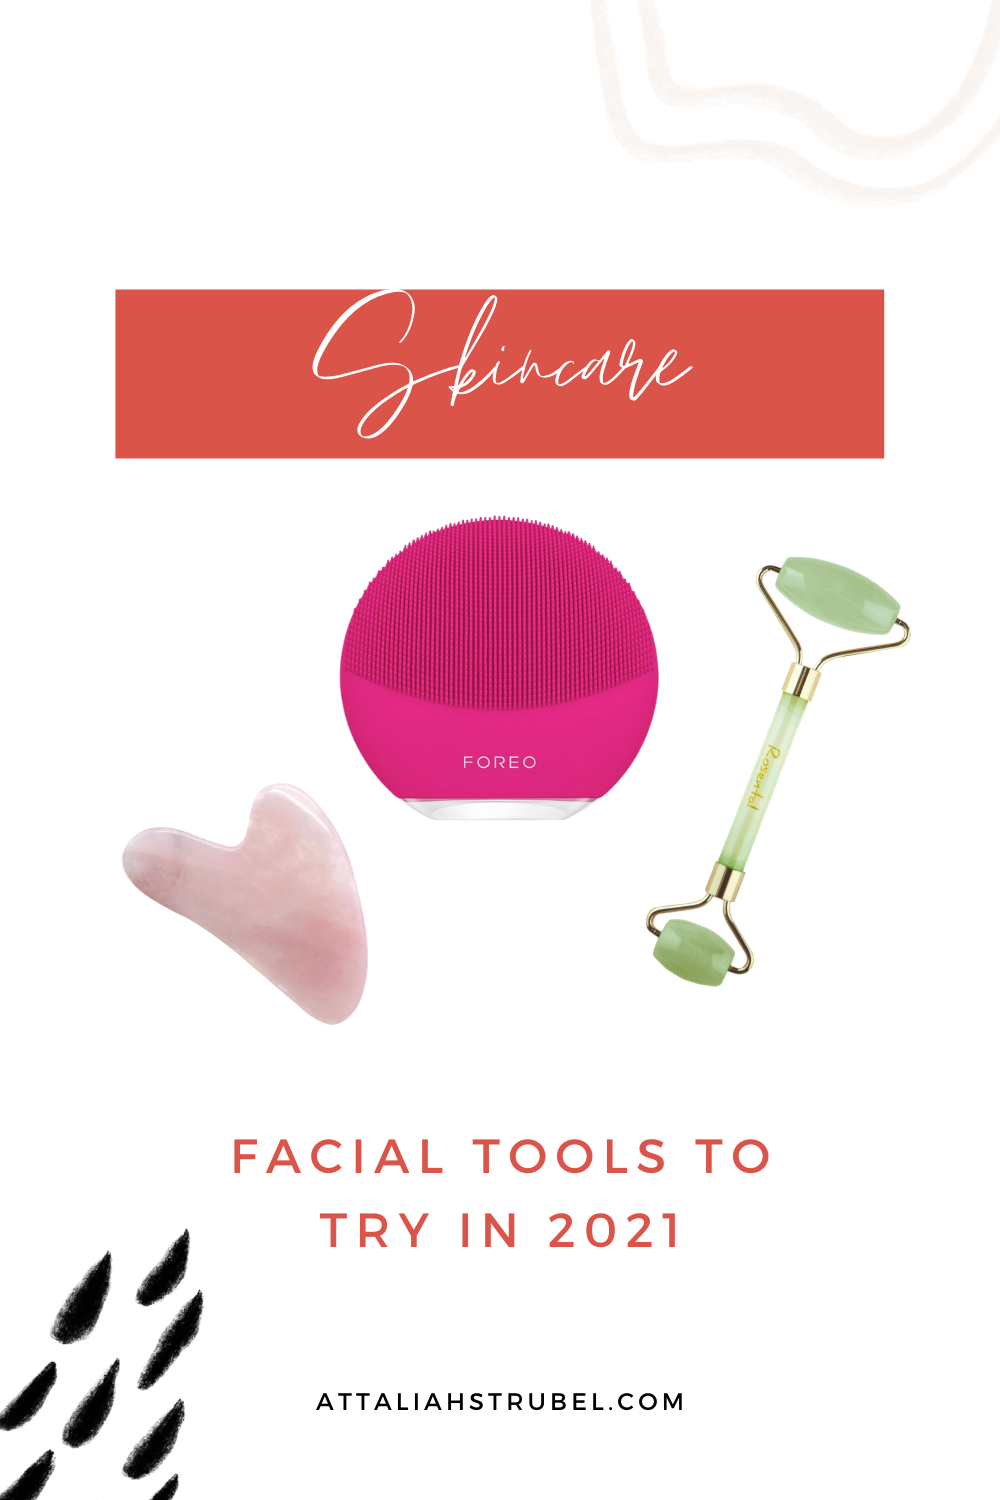 Facial Tools You Should Try in 2021